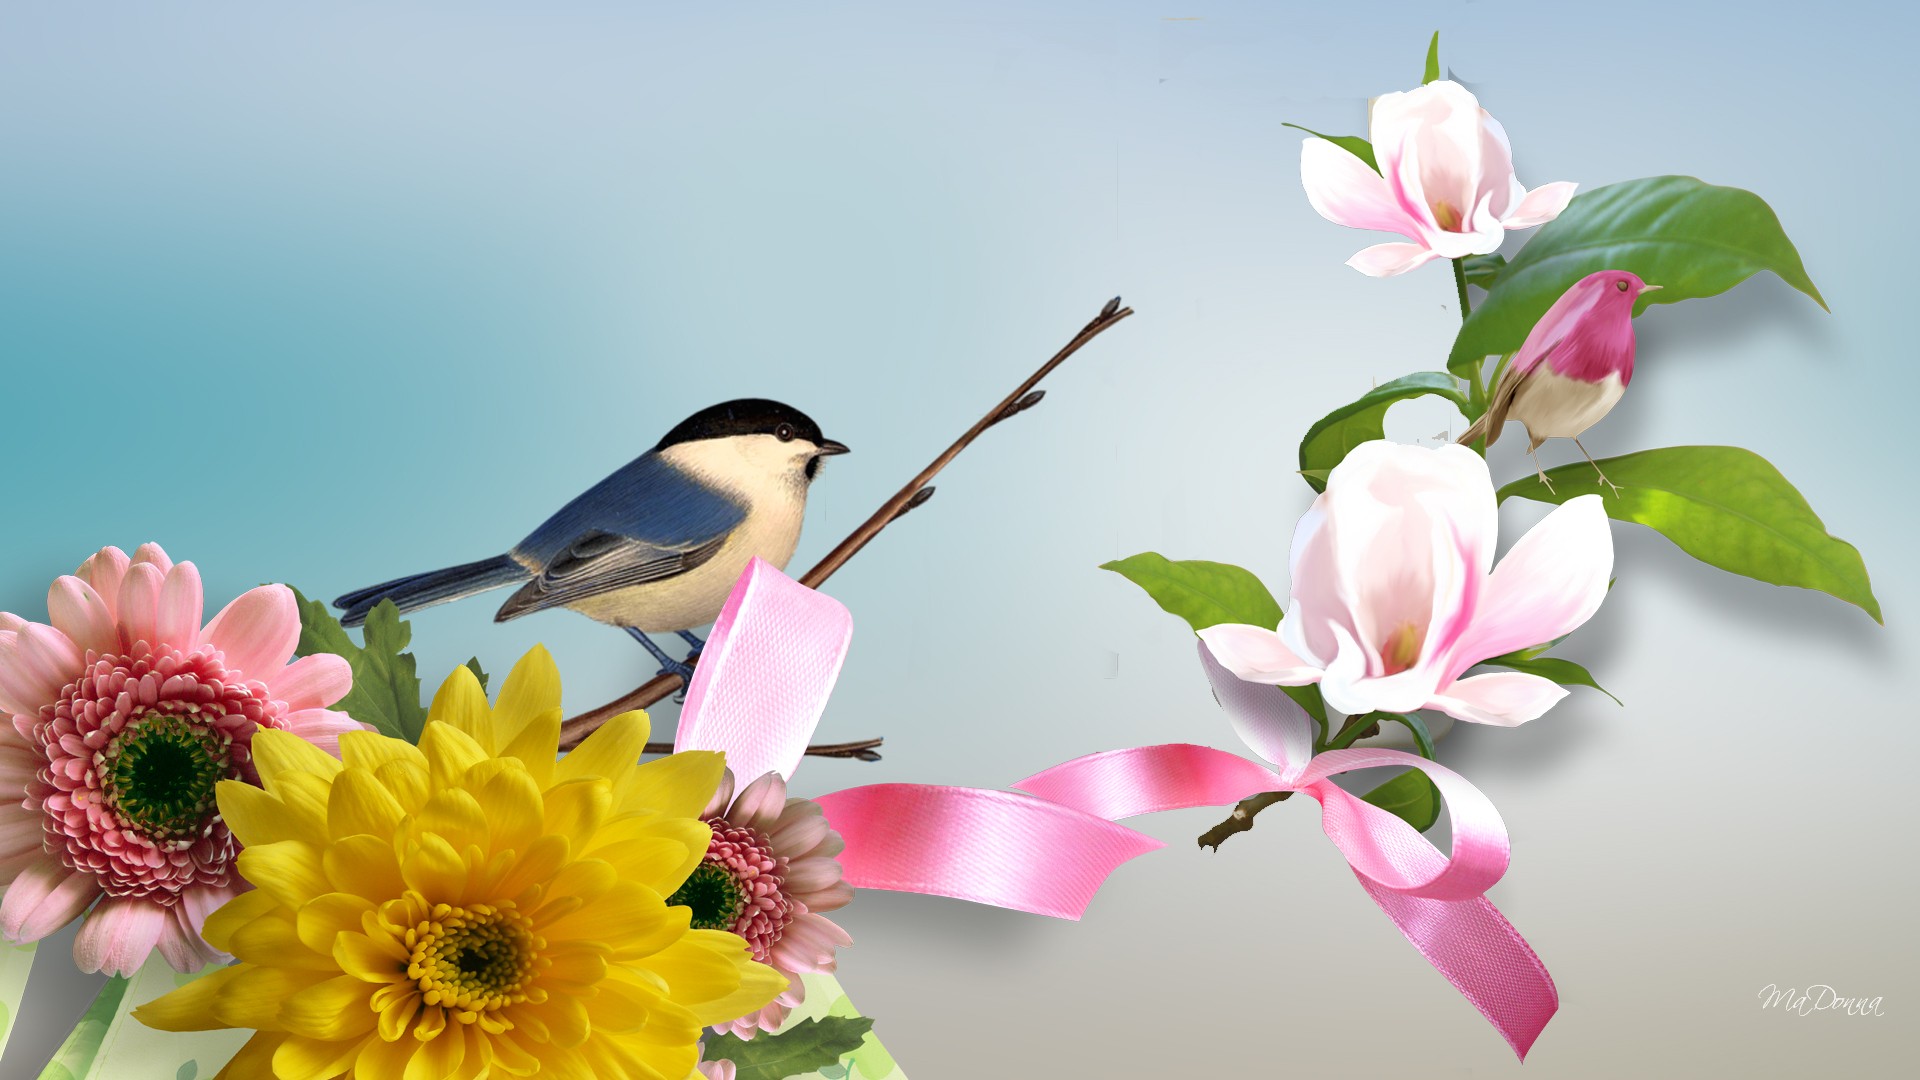 Animated Flower Birds Hd Wallpaper With Resolutions 19201080 Pixel